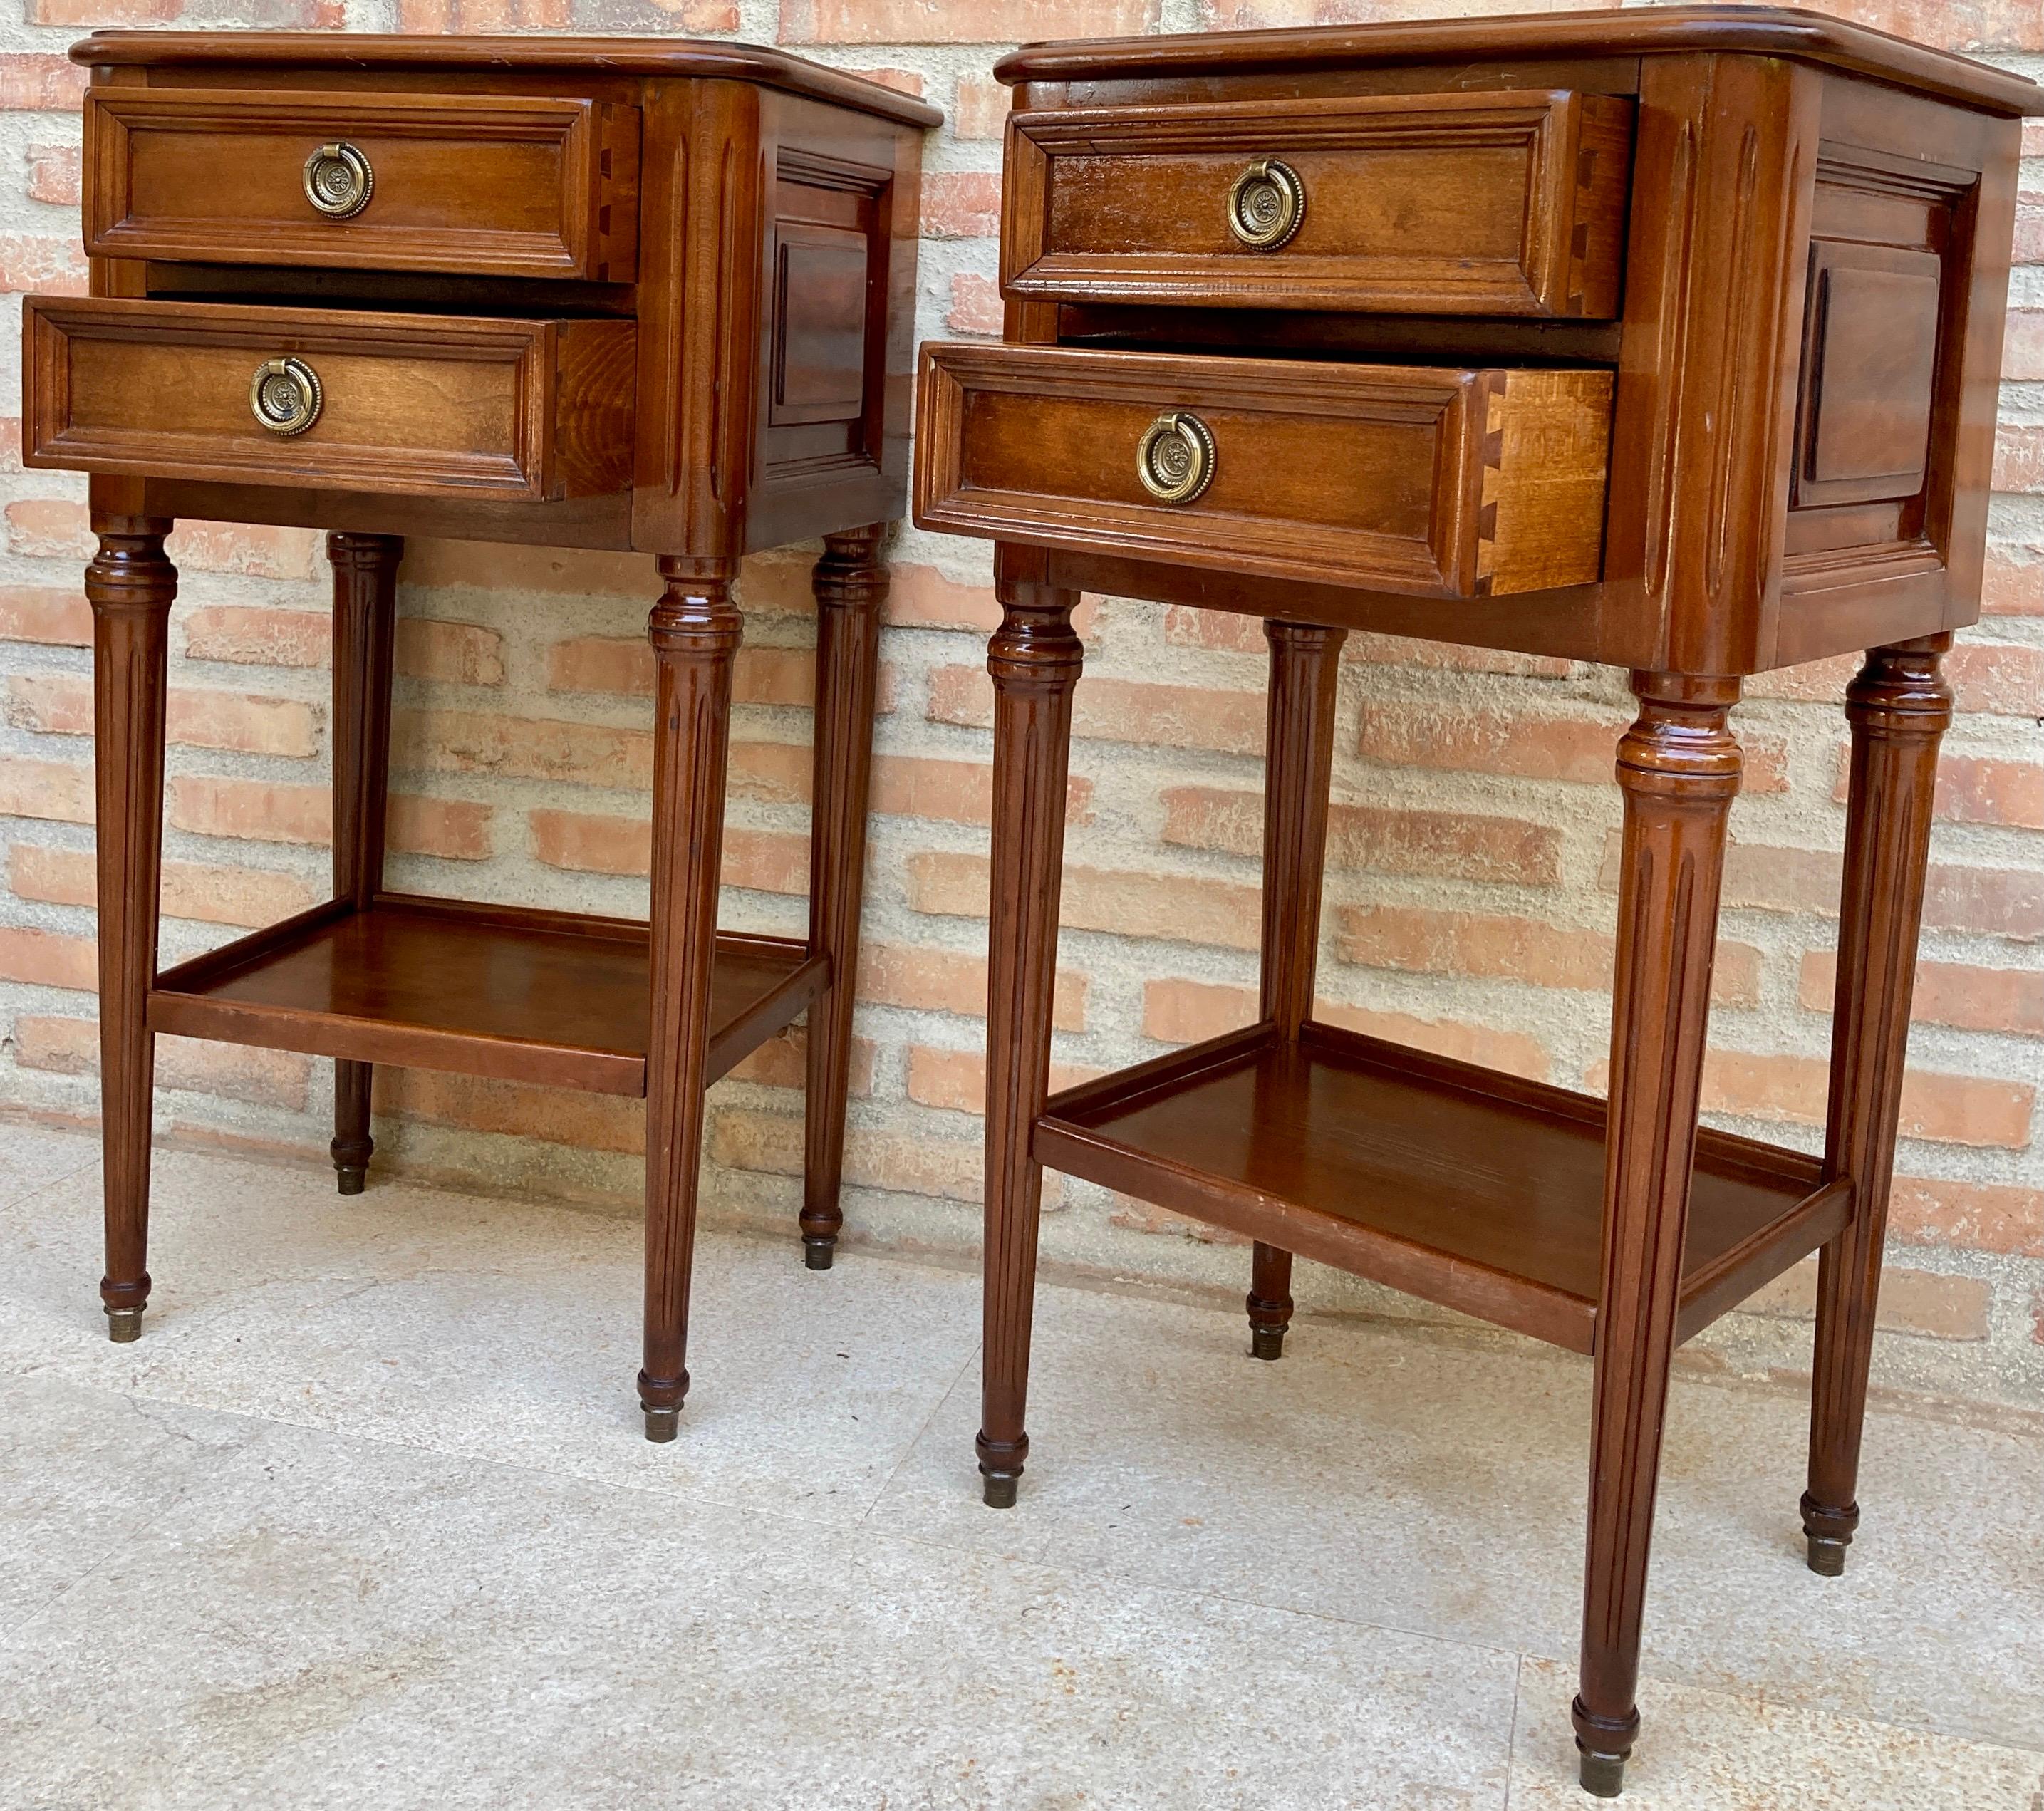 Oak Pair of Mid-Century French Walnut Nightstands with Two Drawers and One Low Shelf